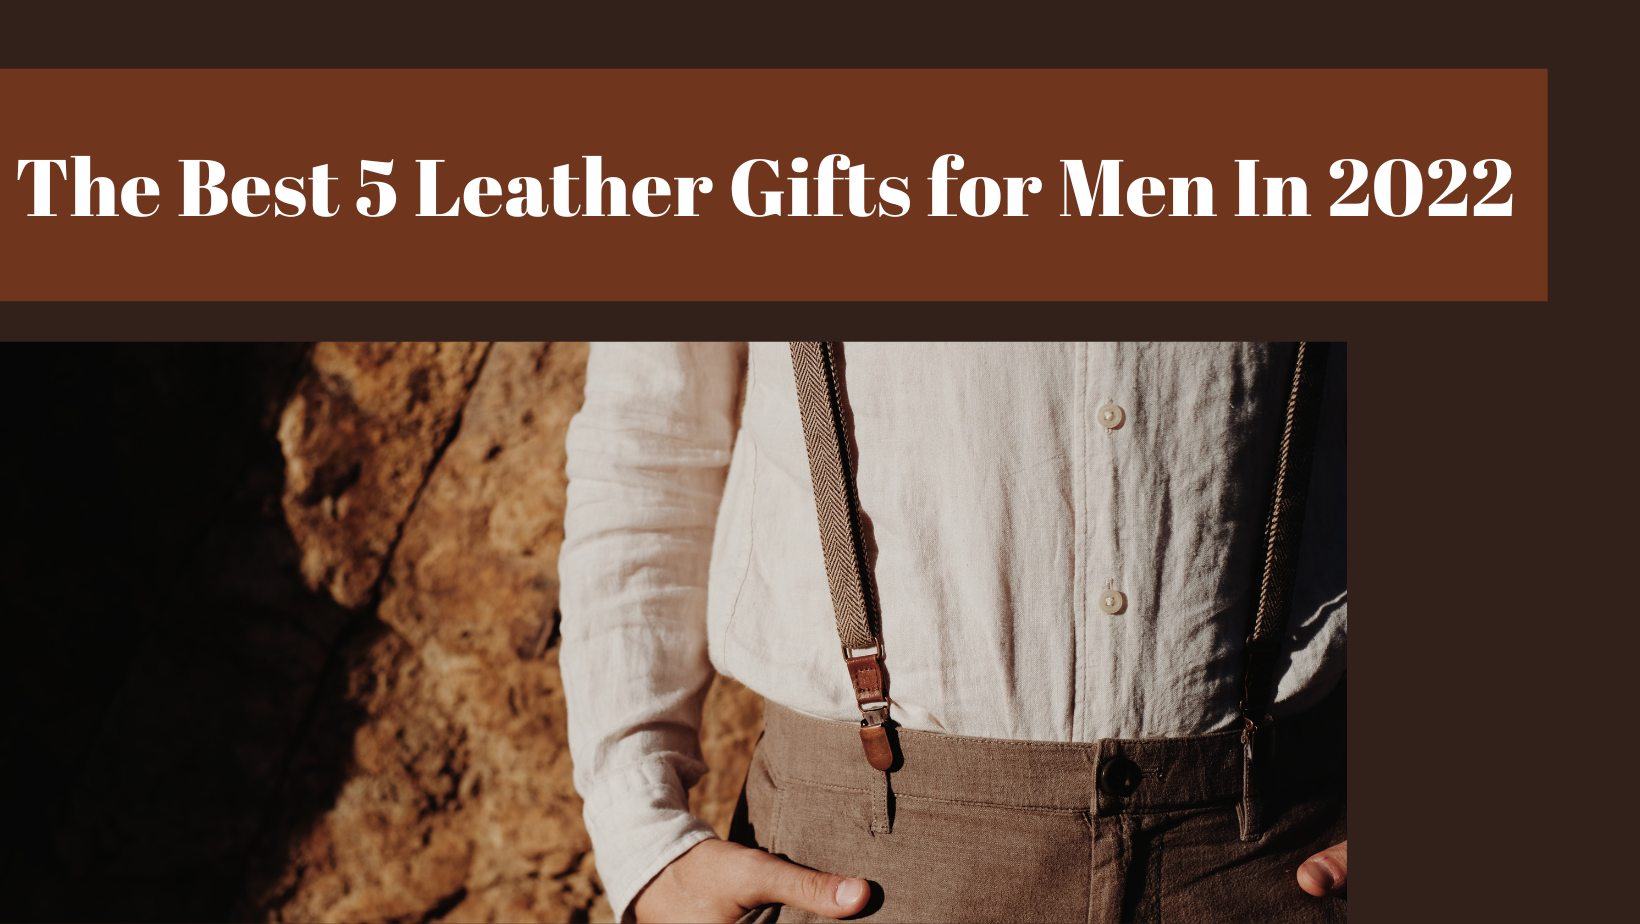 The Best 5 Leather Gifts for Men In 2022